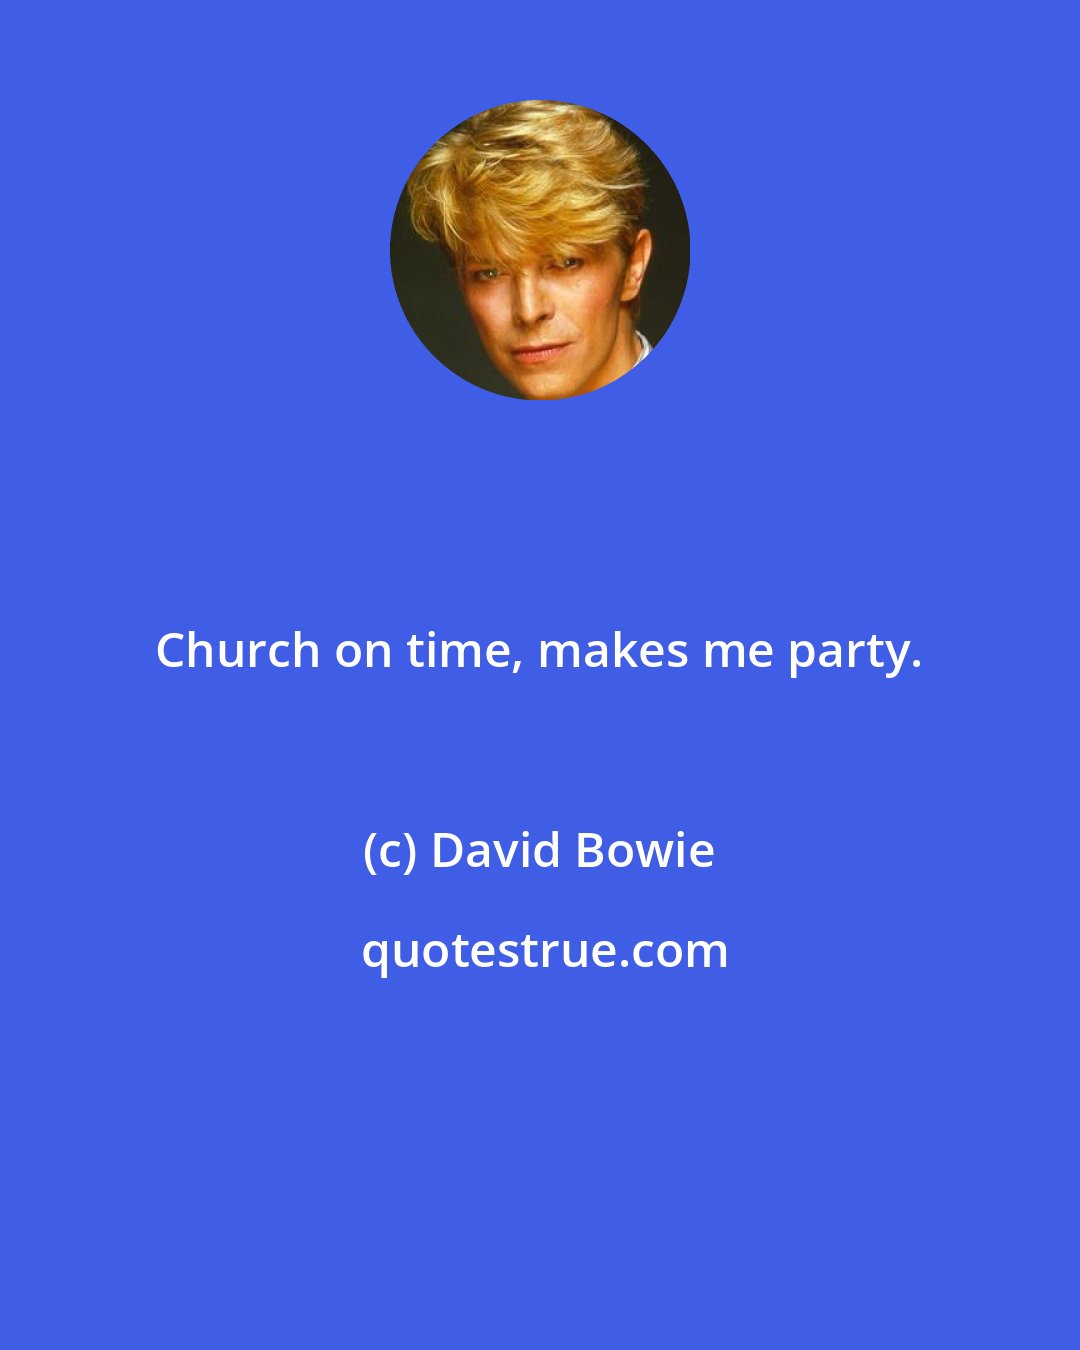 David Bowie: Church on time, makes me party.